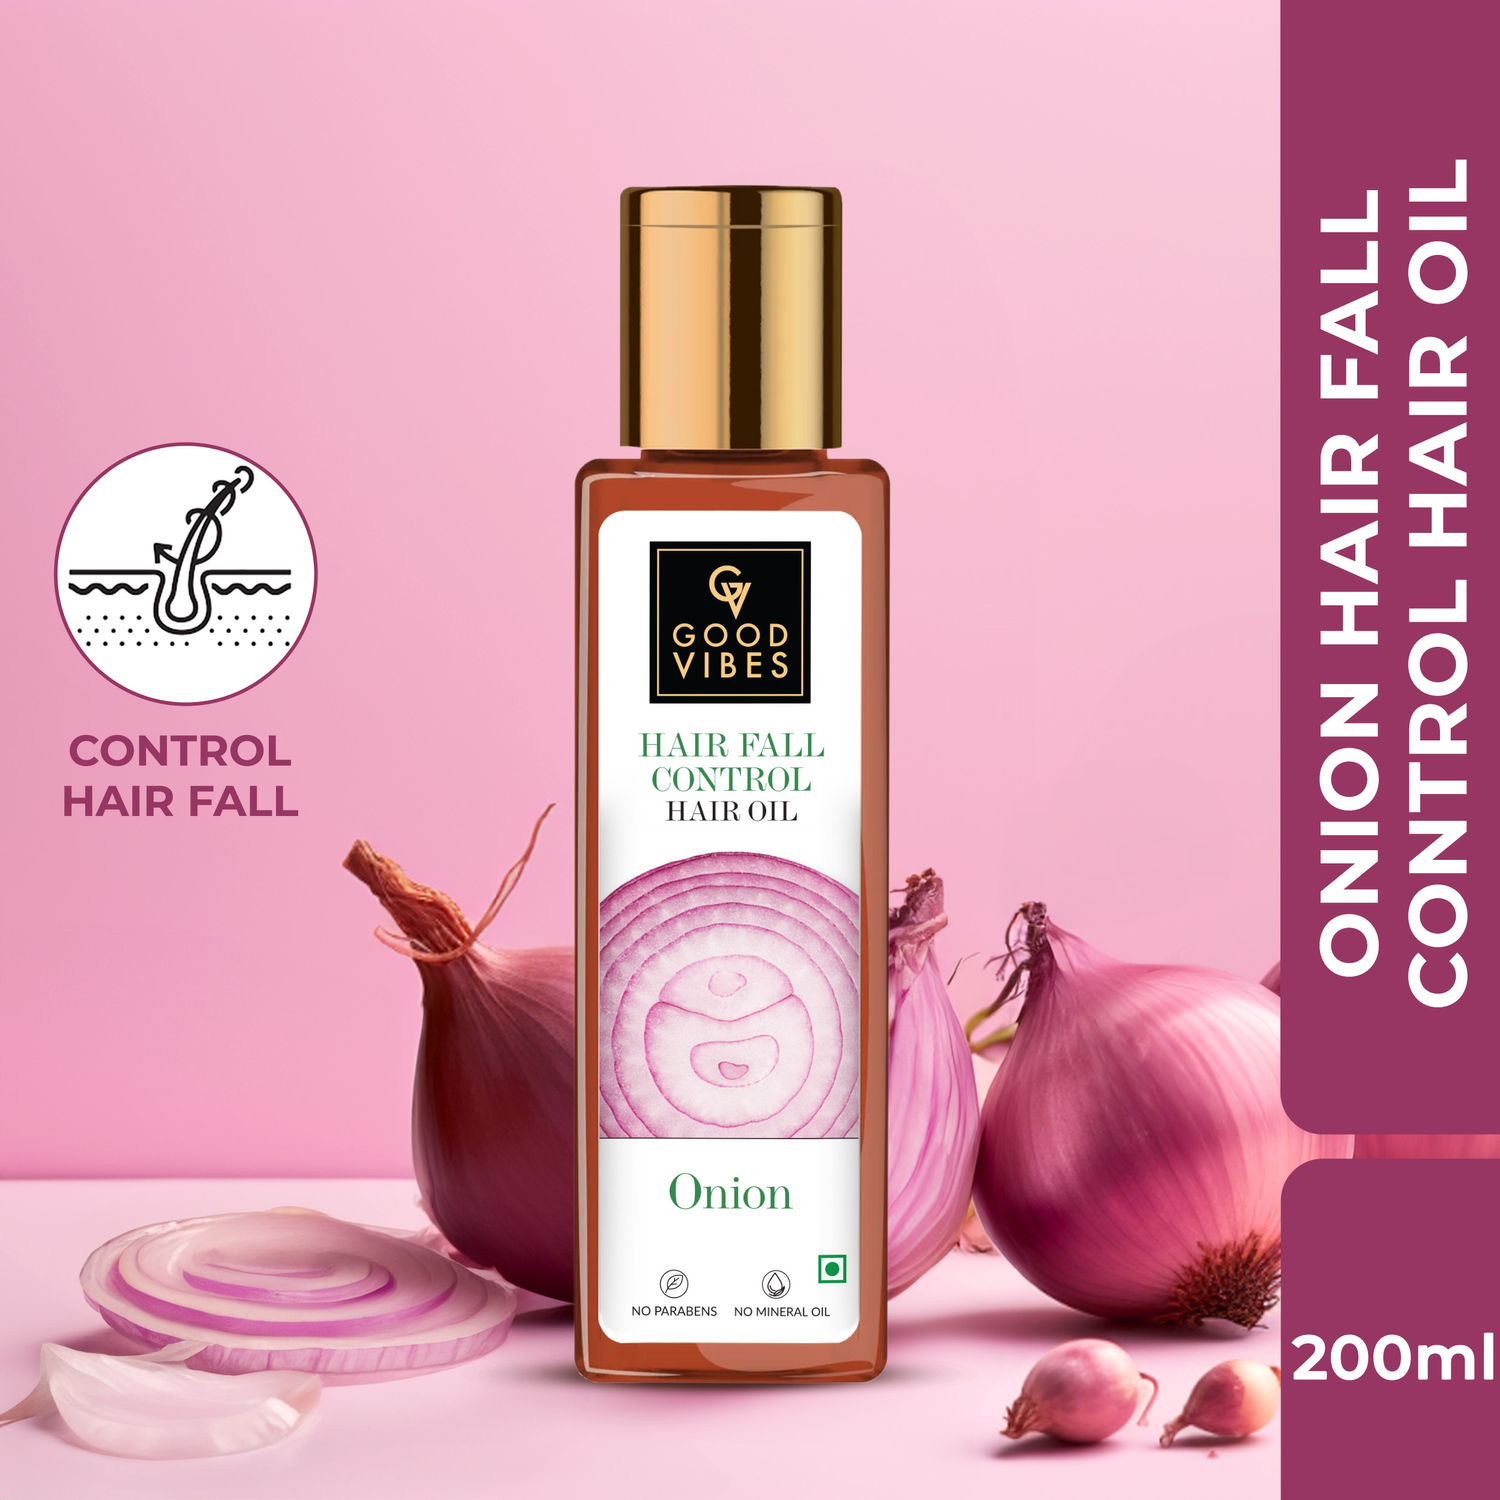 Buy Good Vibes Onion Hairfall Control Hair Oil | Strenghtening, Smoothening | No Parabens, No Sulphates, No Mineral Oil, No Animal Testing (200 ml) - Purplle